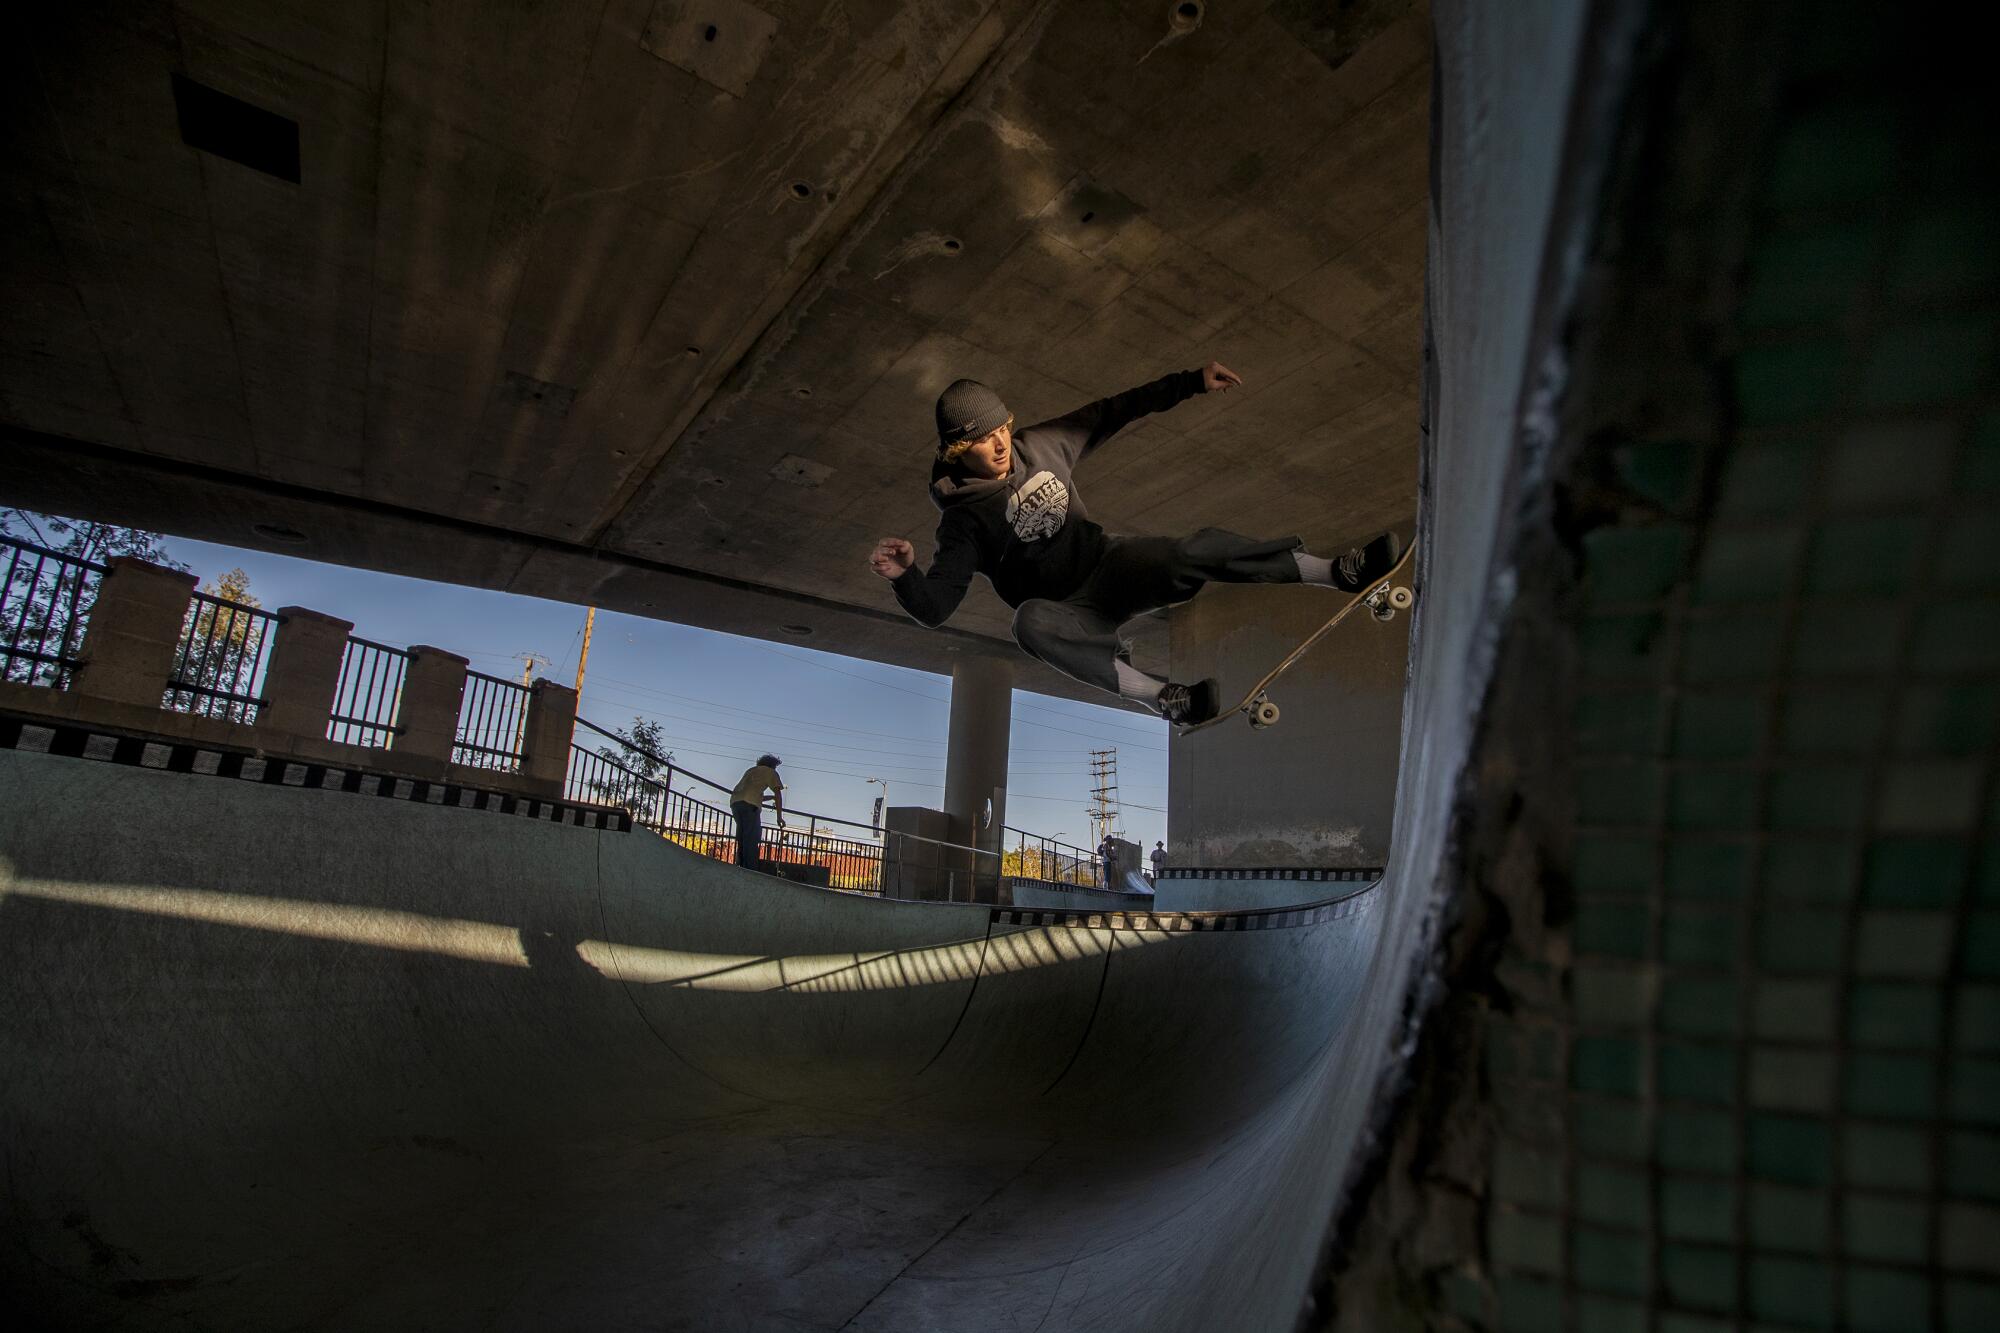 A skater does a trick in solitude at the Channel Street Skatepark.